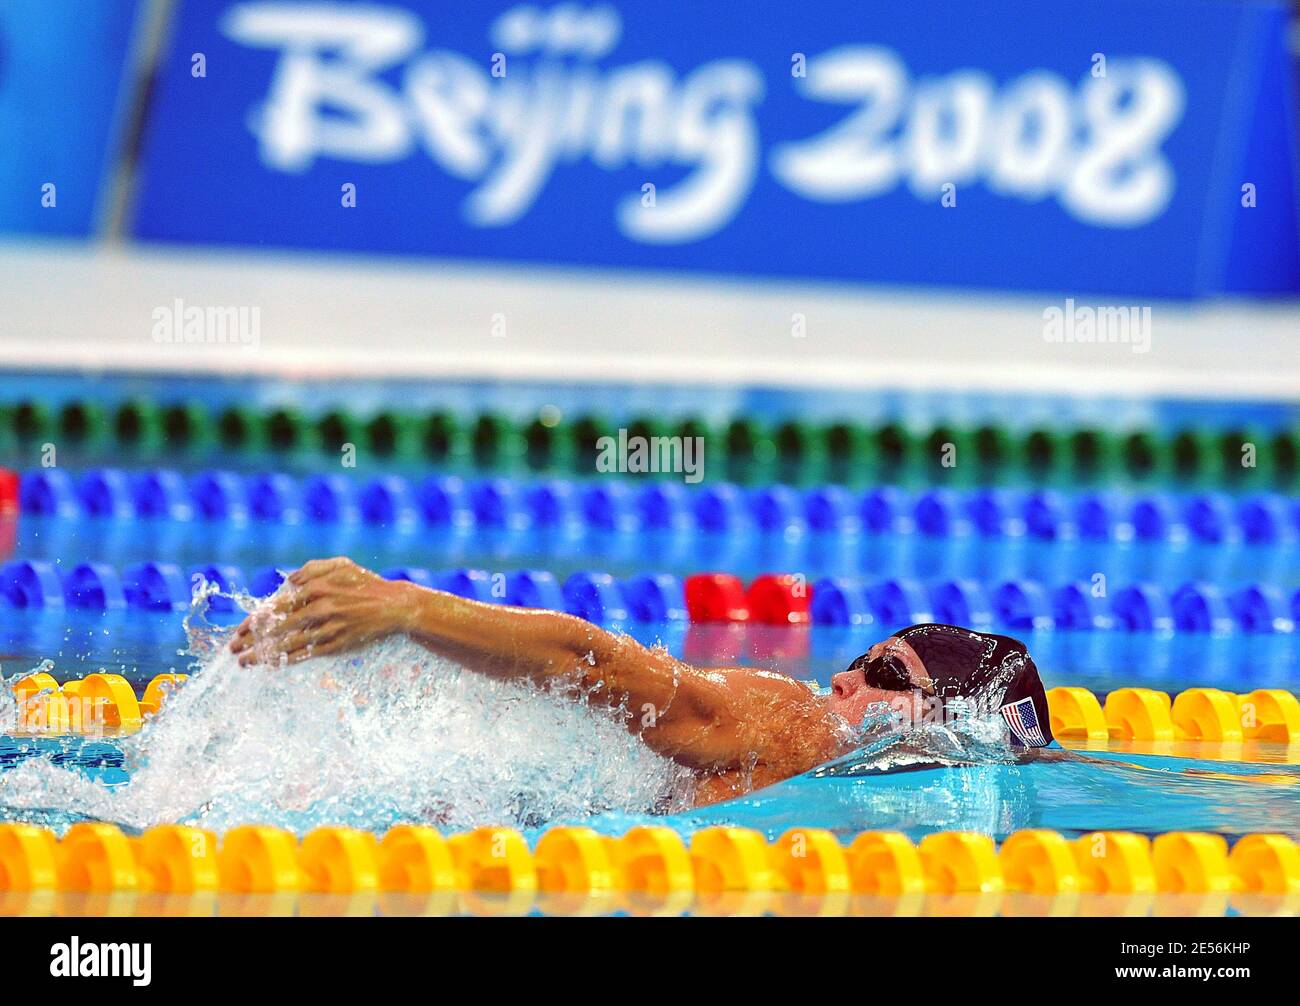 Natalie Coughlin of the United States competes in the Women's 100m Backstroke Semifinal 1 held day 3 of the XXIX Olympic games at the Olympic National aquatic center in Beijing, China on August 11, 2008. Photo by Gouhier-Hahn-Nebinger/Cameleon/ABACAPRESS.COM Stock Photo